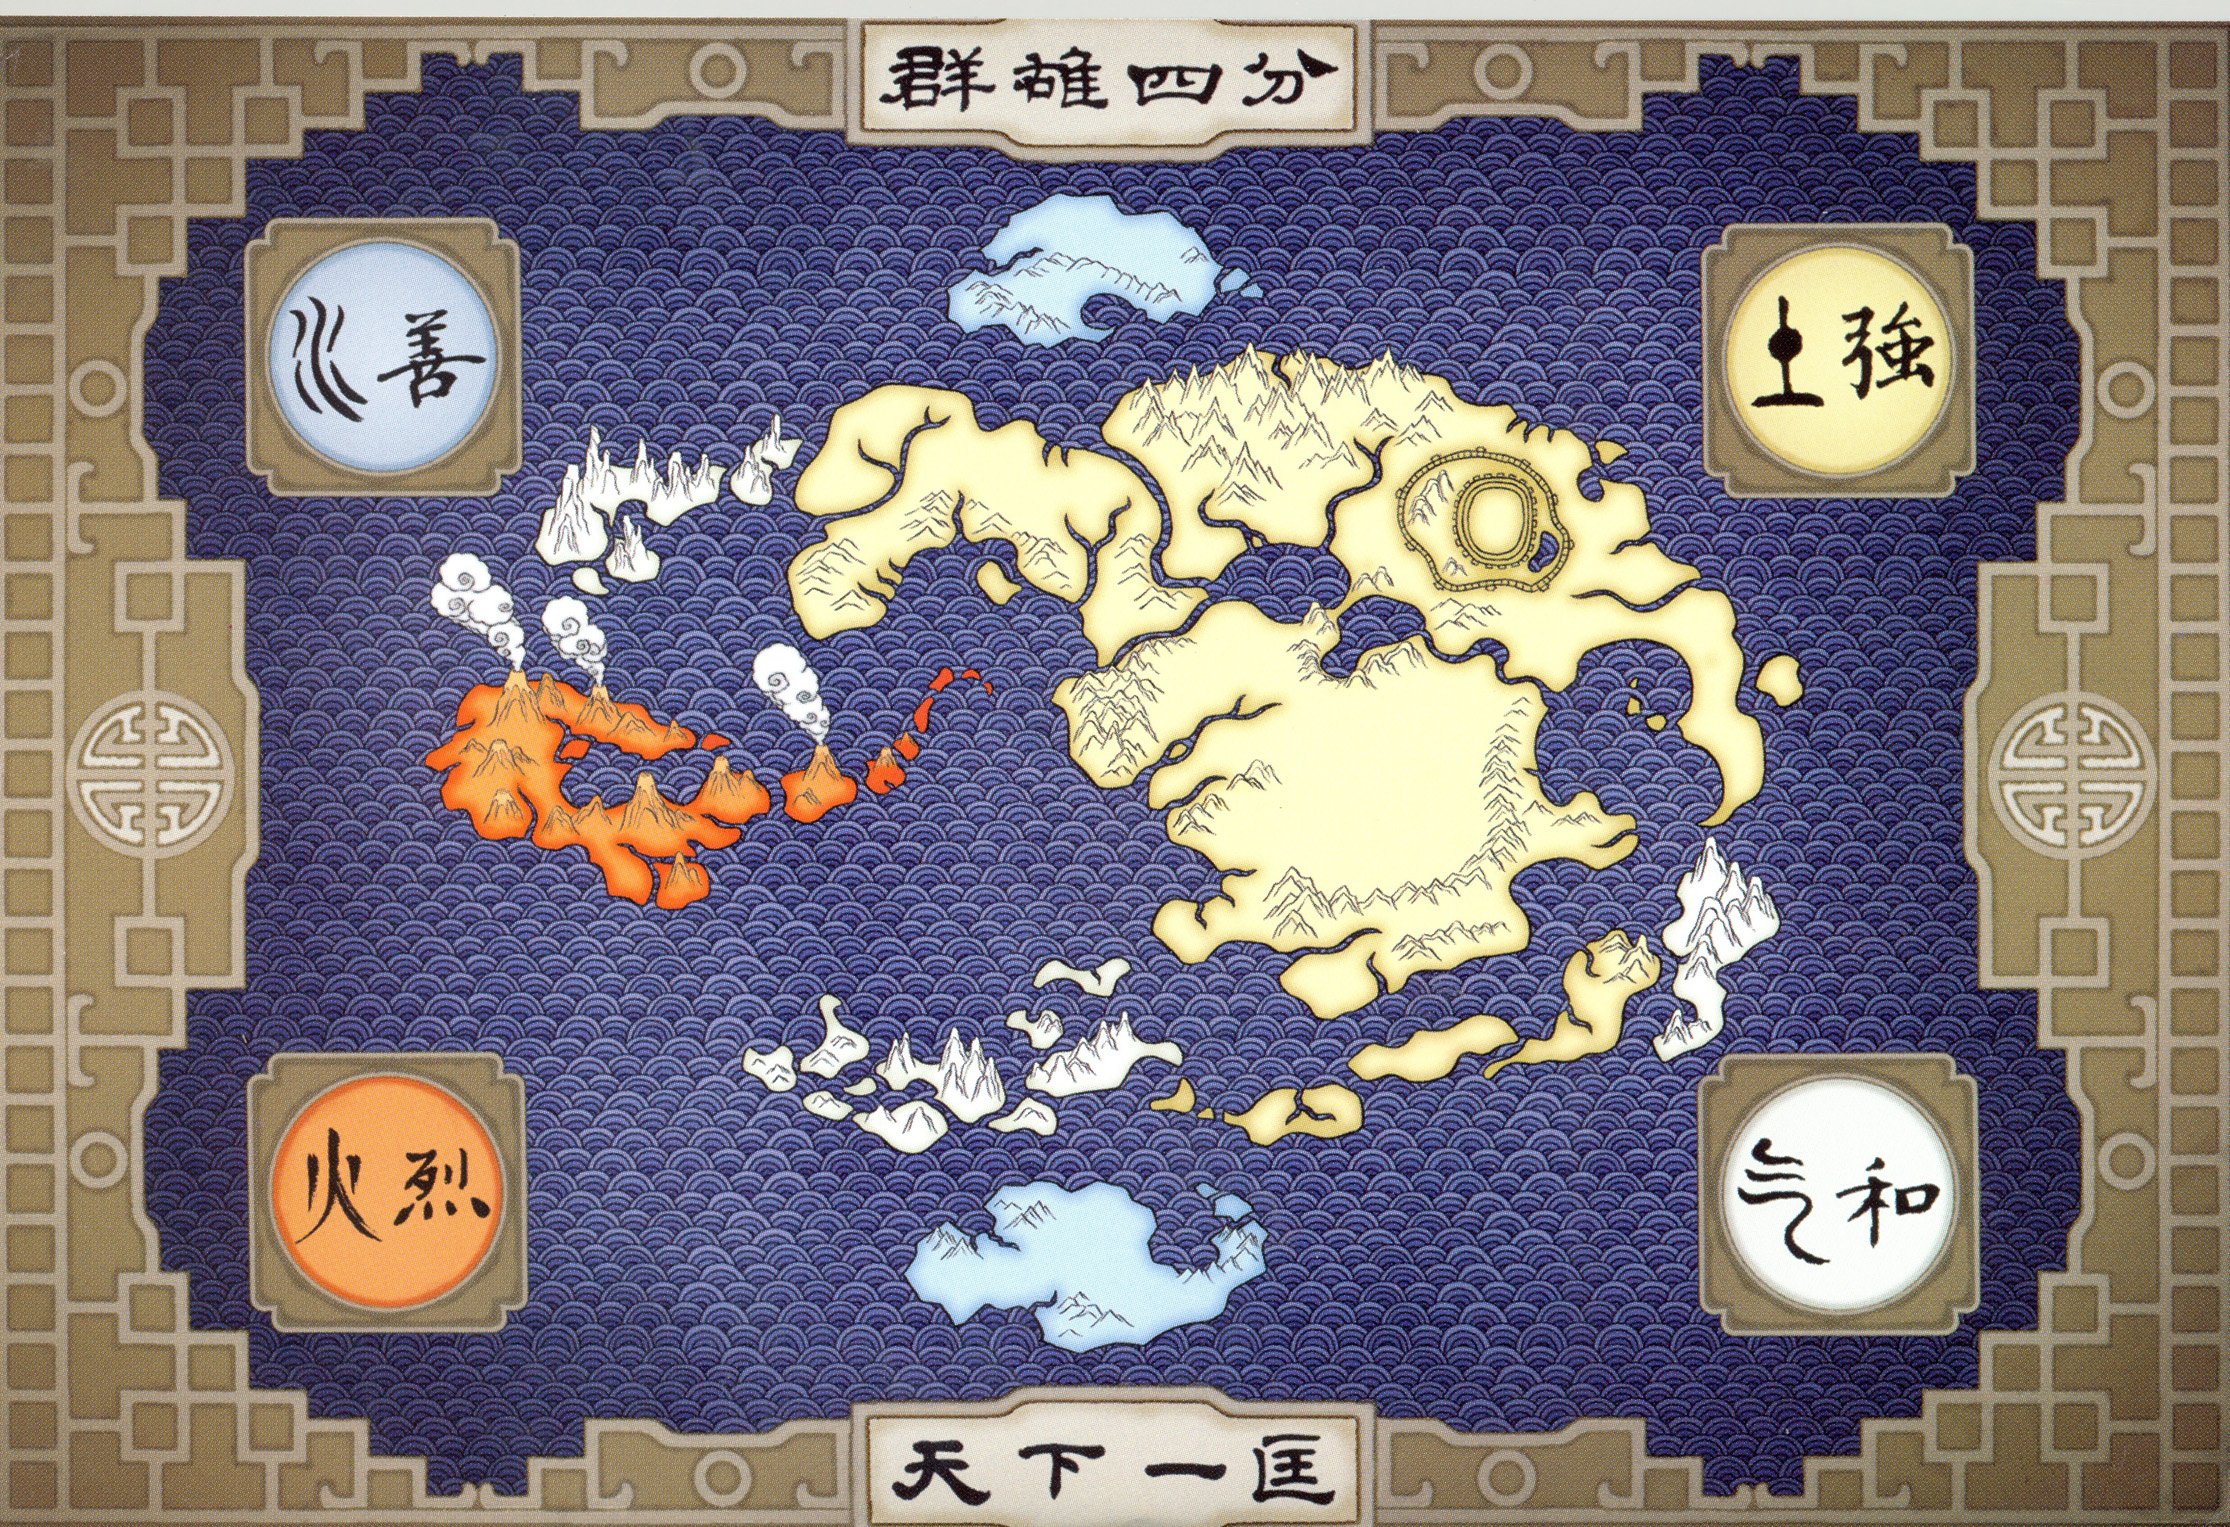 avatar the last airbender wallpaper elements earth